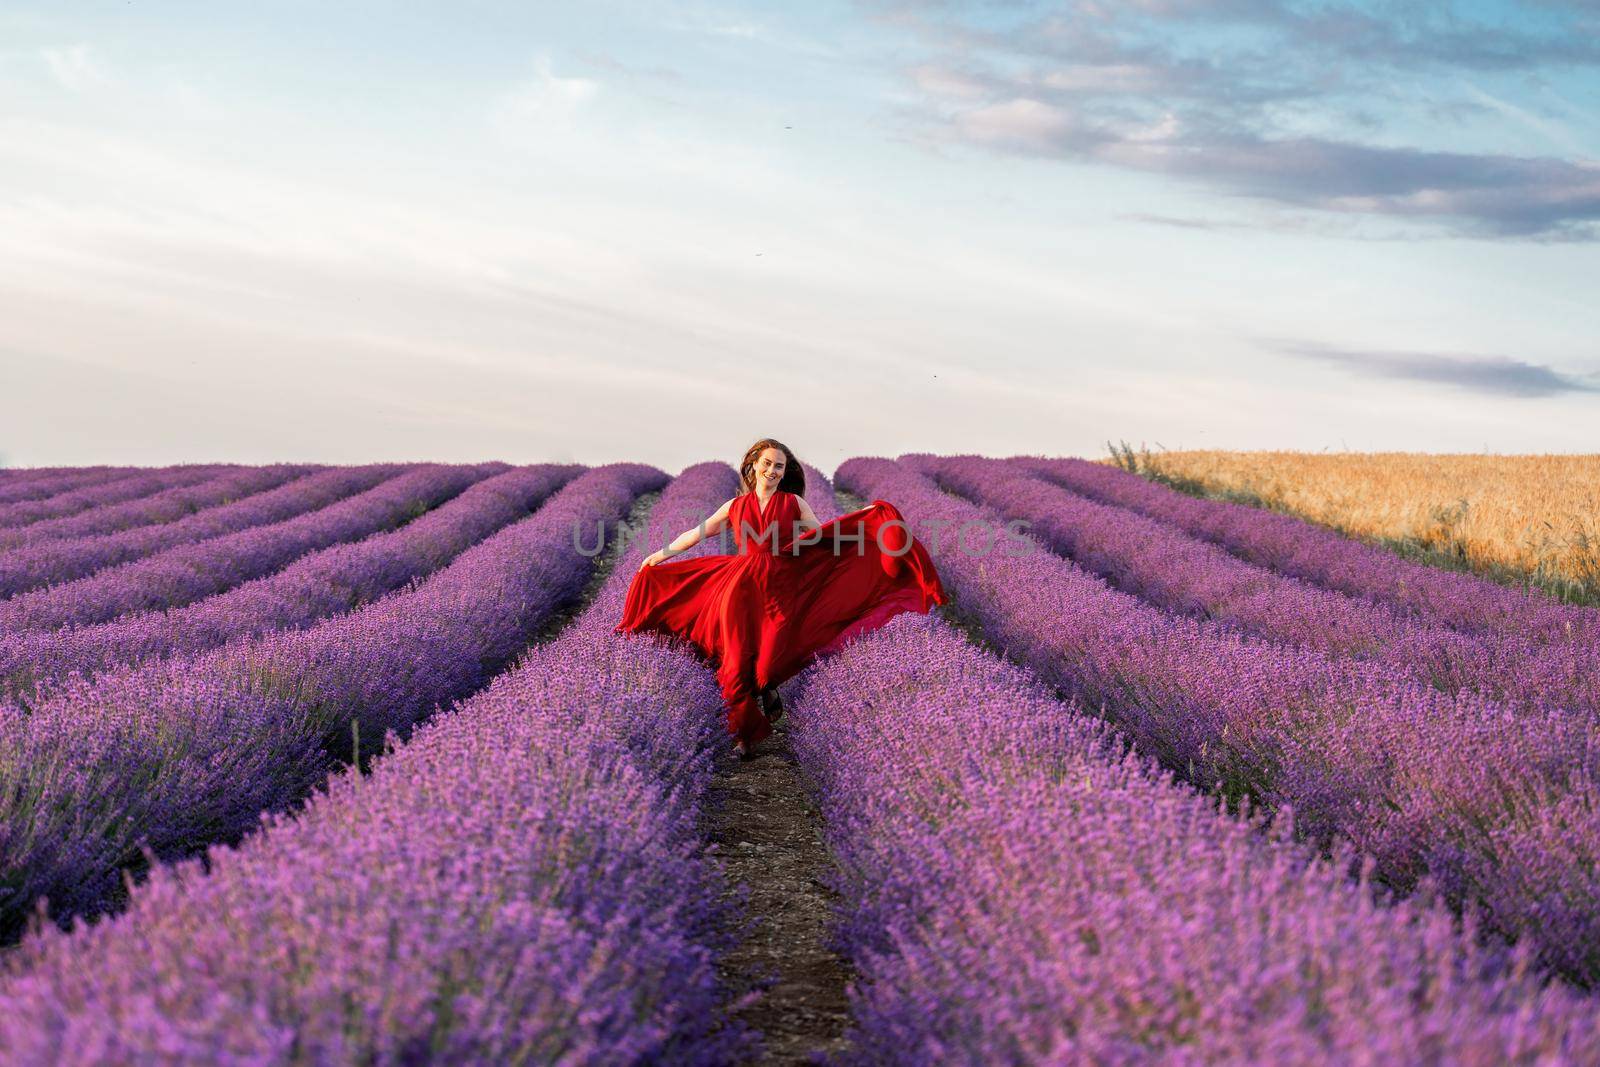 Among the lavender fields. A beautiful girl in a red dress runs against the background of a large lavender field.